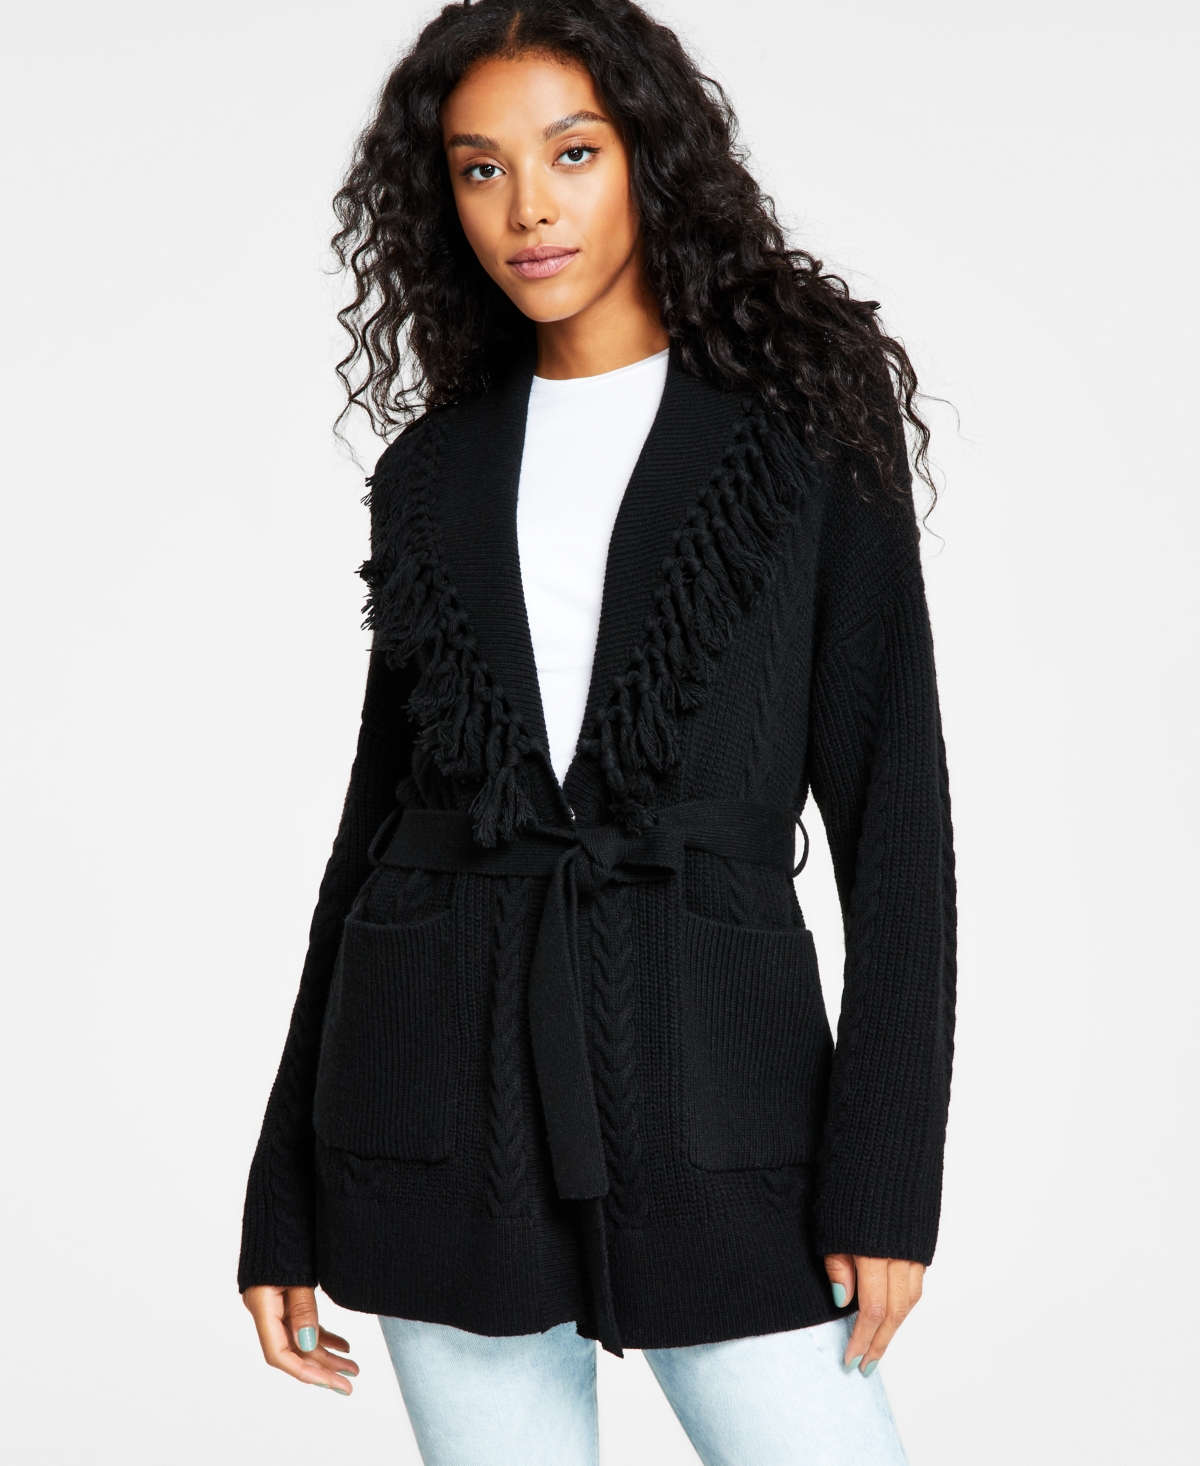 Guess Women's Anne Fringe-Trim Belted Wrap Cardigan